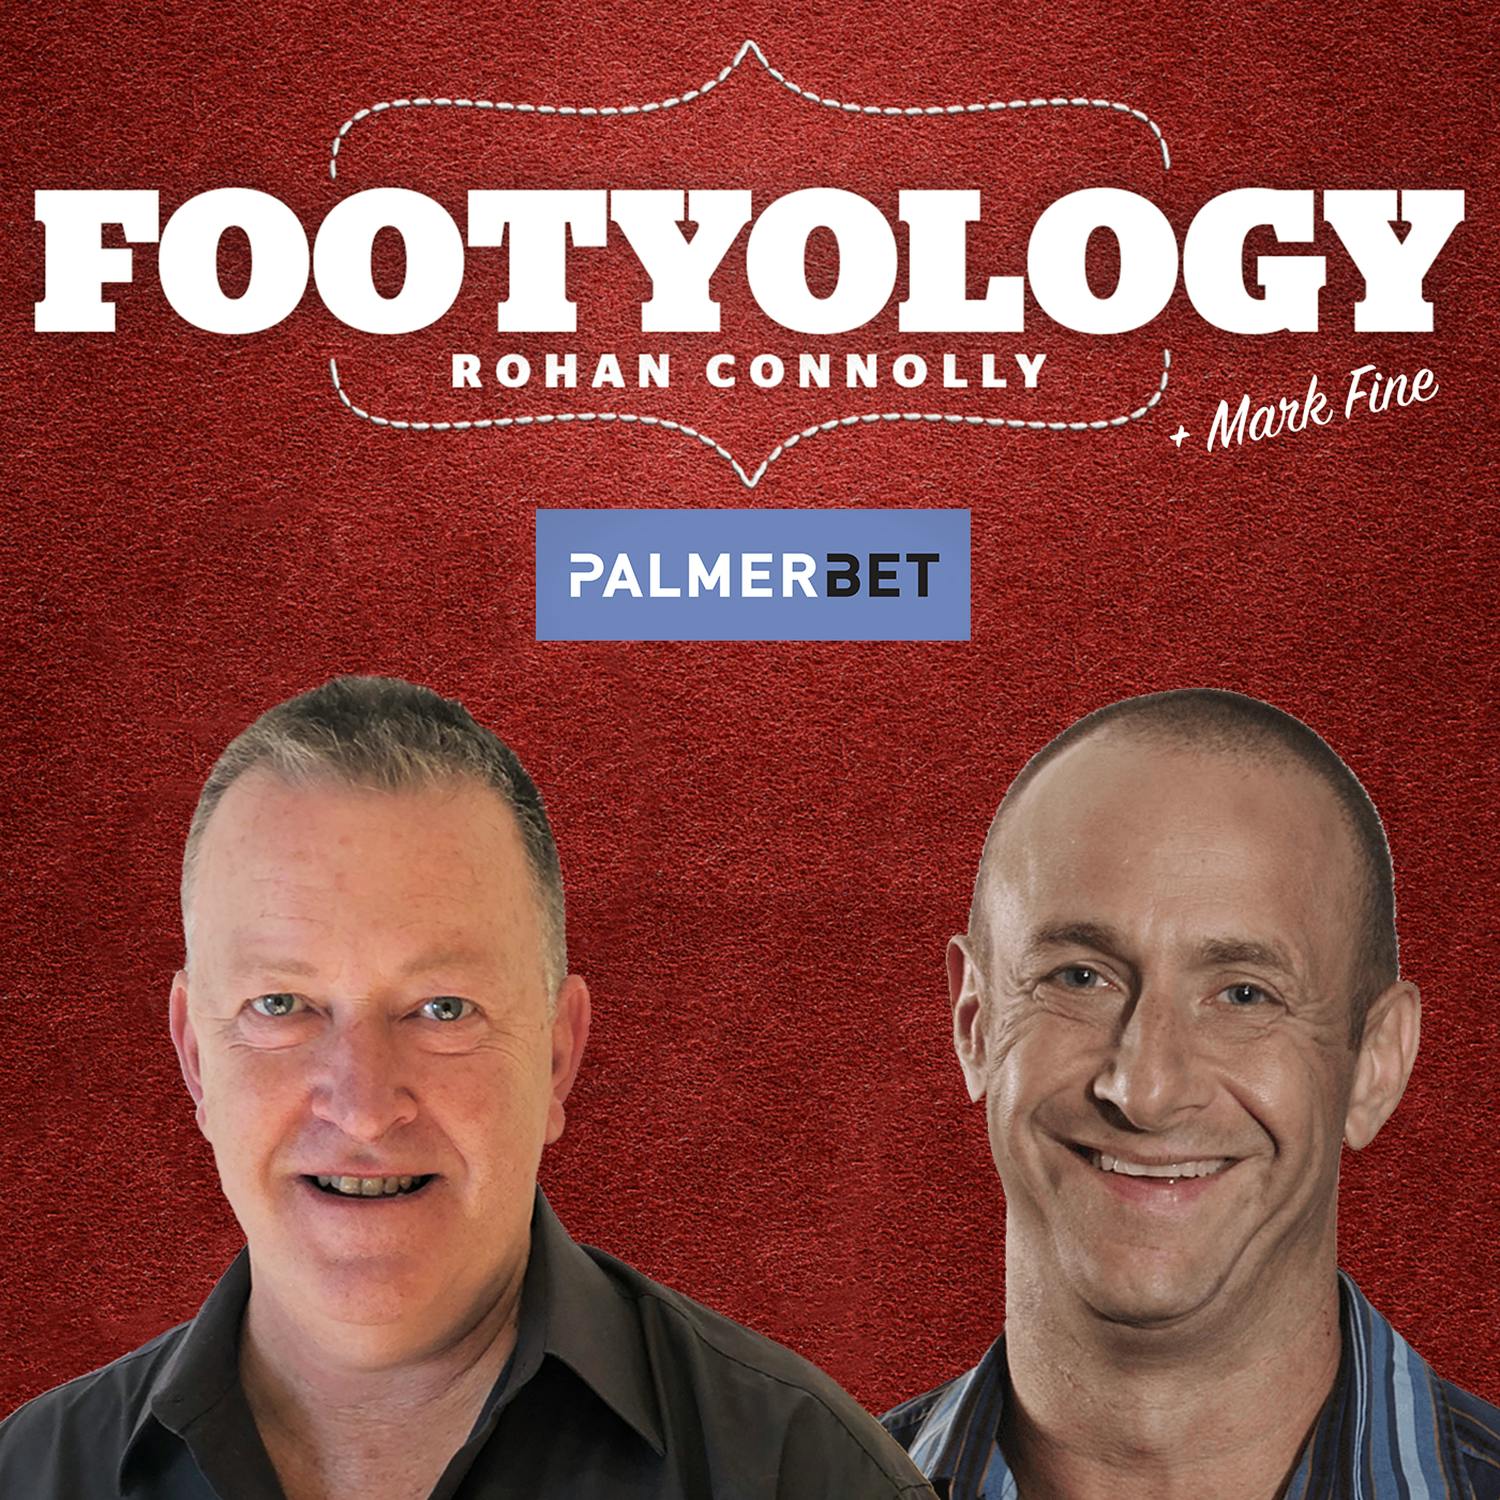 Footyology Podcast - October 14th 2021